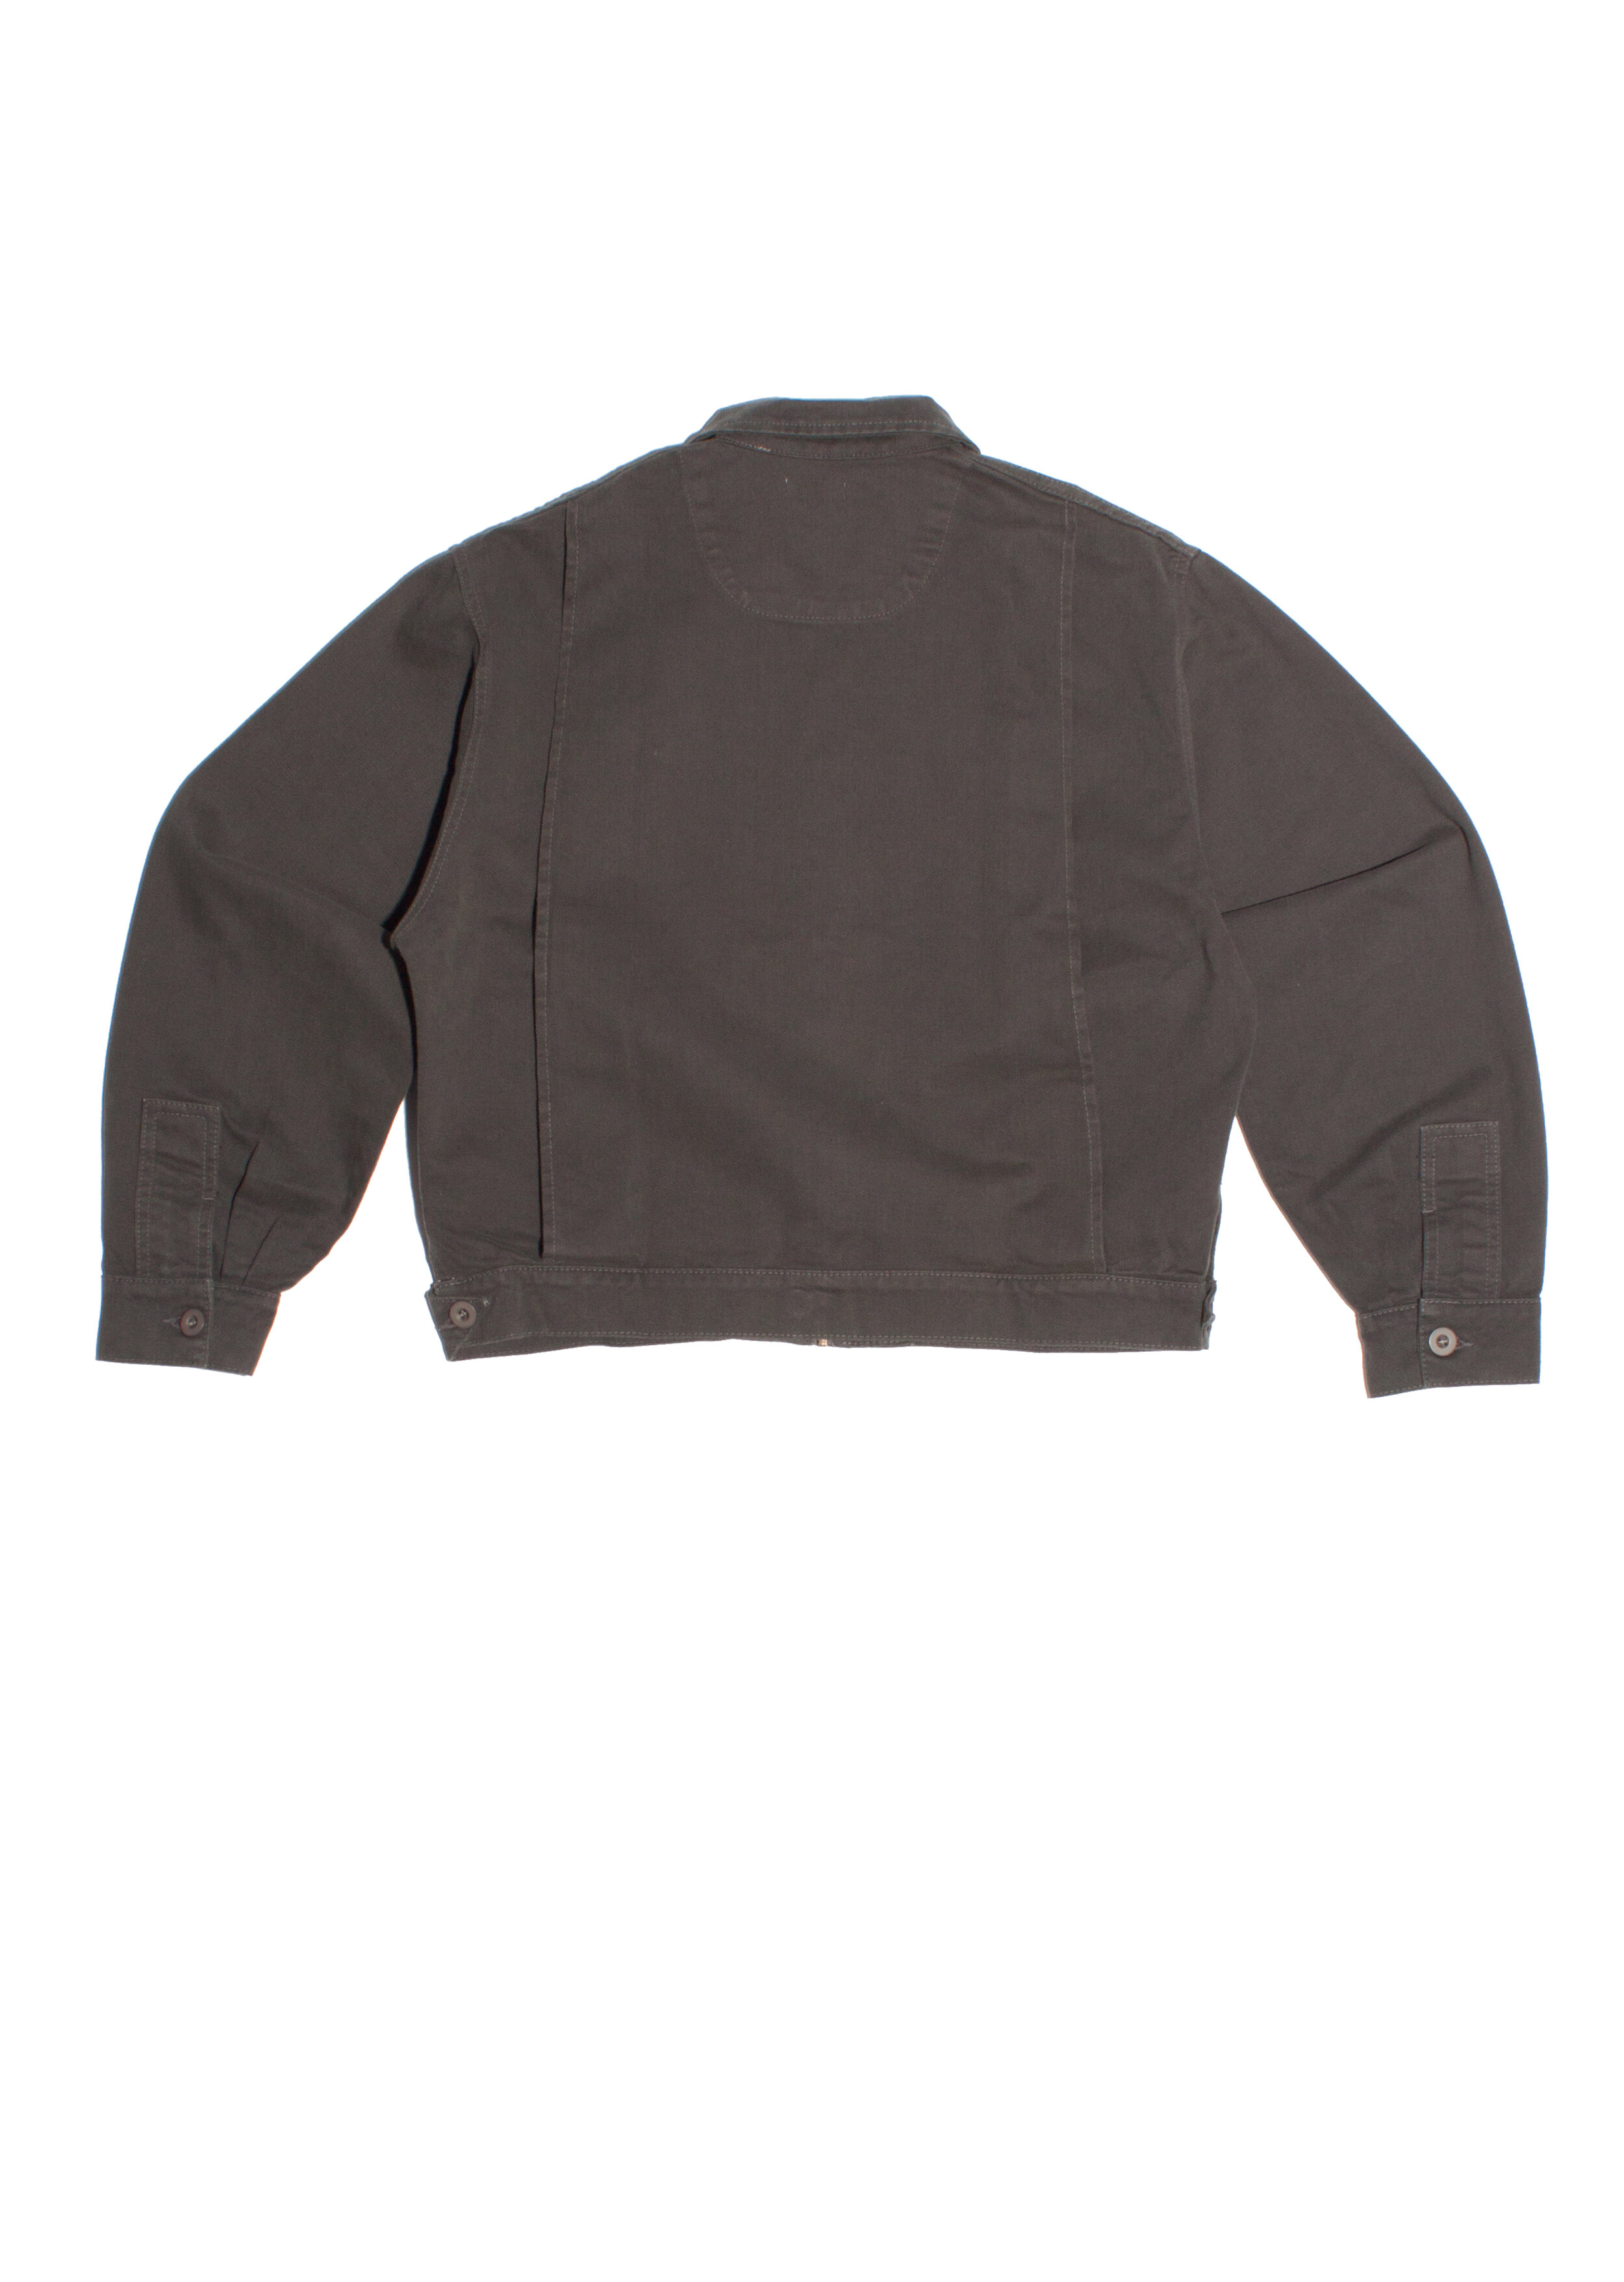 CAGUAMA JACKET - CHARCOAL — WILLY CHAVARRIA